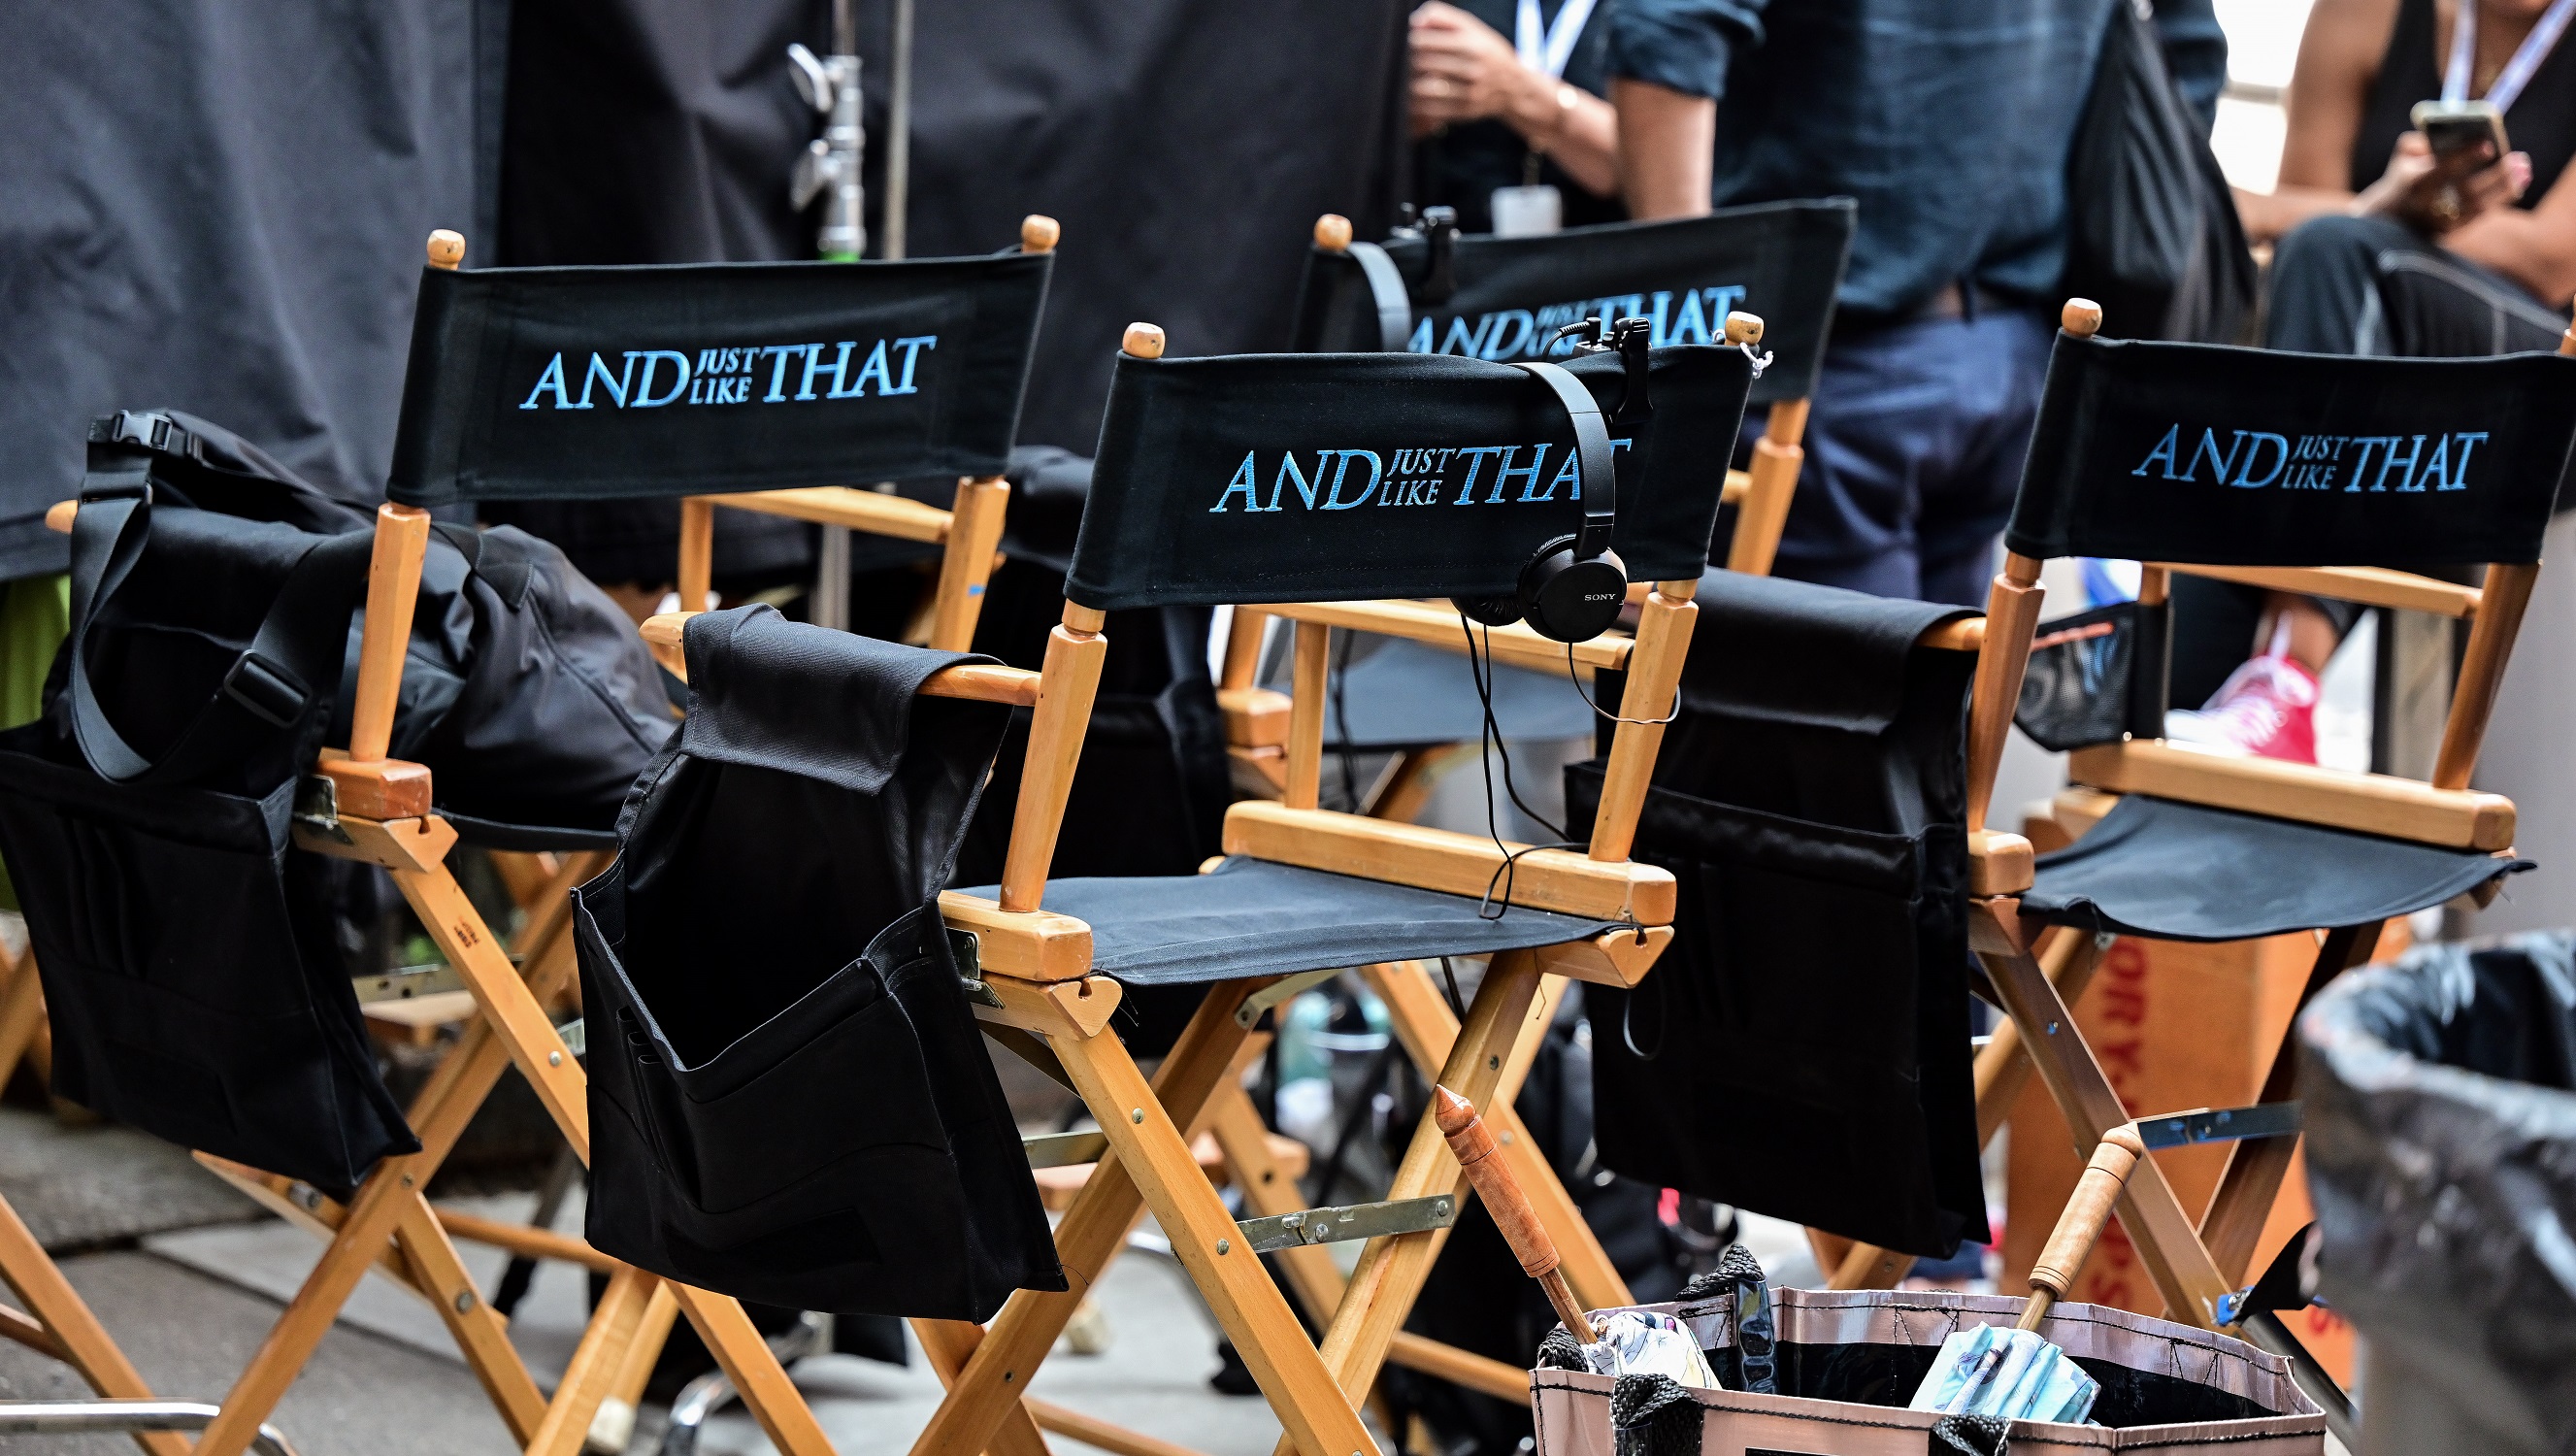 Directors chairs are seen on the set of 'And Just Like That...' the 'Sex and the City' reboot on July 27